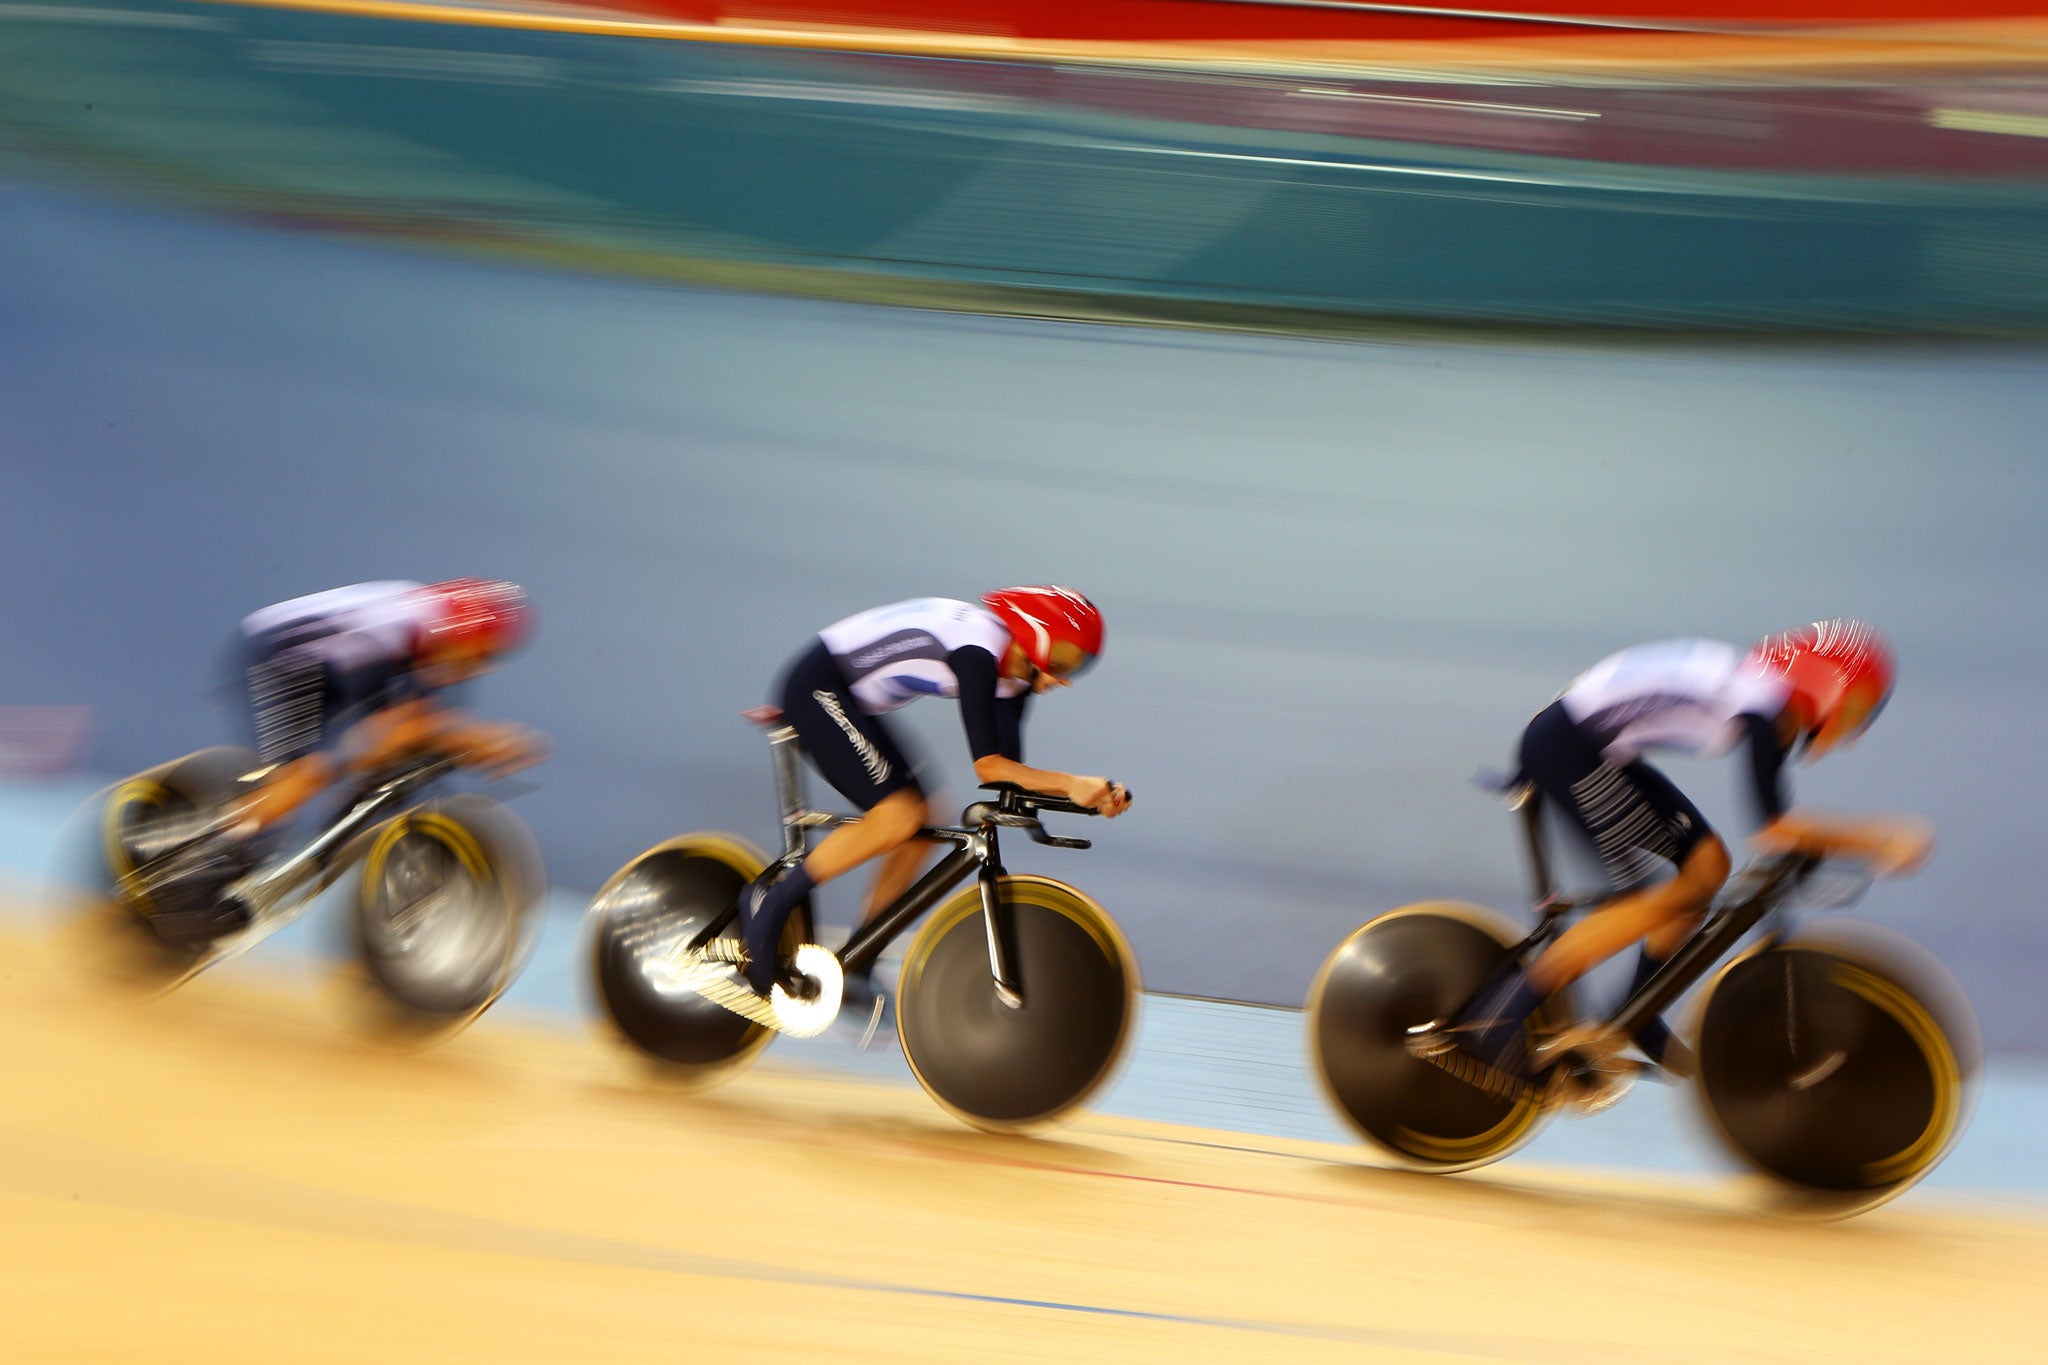 Dani King, Laura Trott and Joanna Rowsell competing for Great Britain during the Women's Team Pursuit event at the 2012 Olympic Games